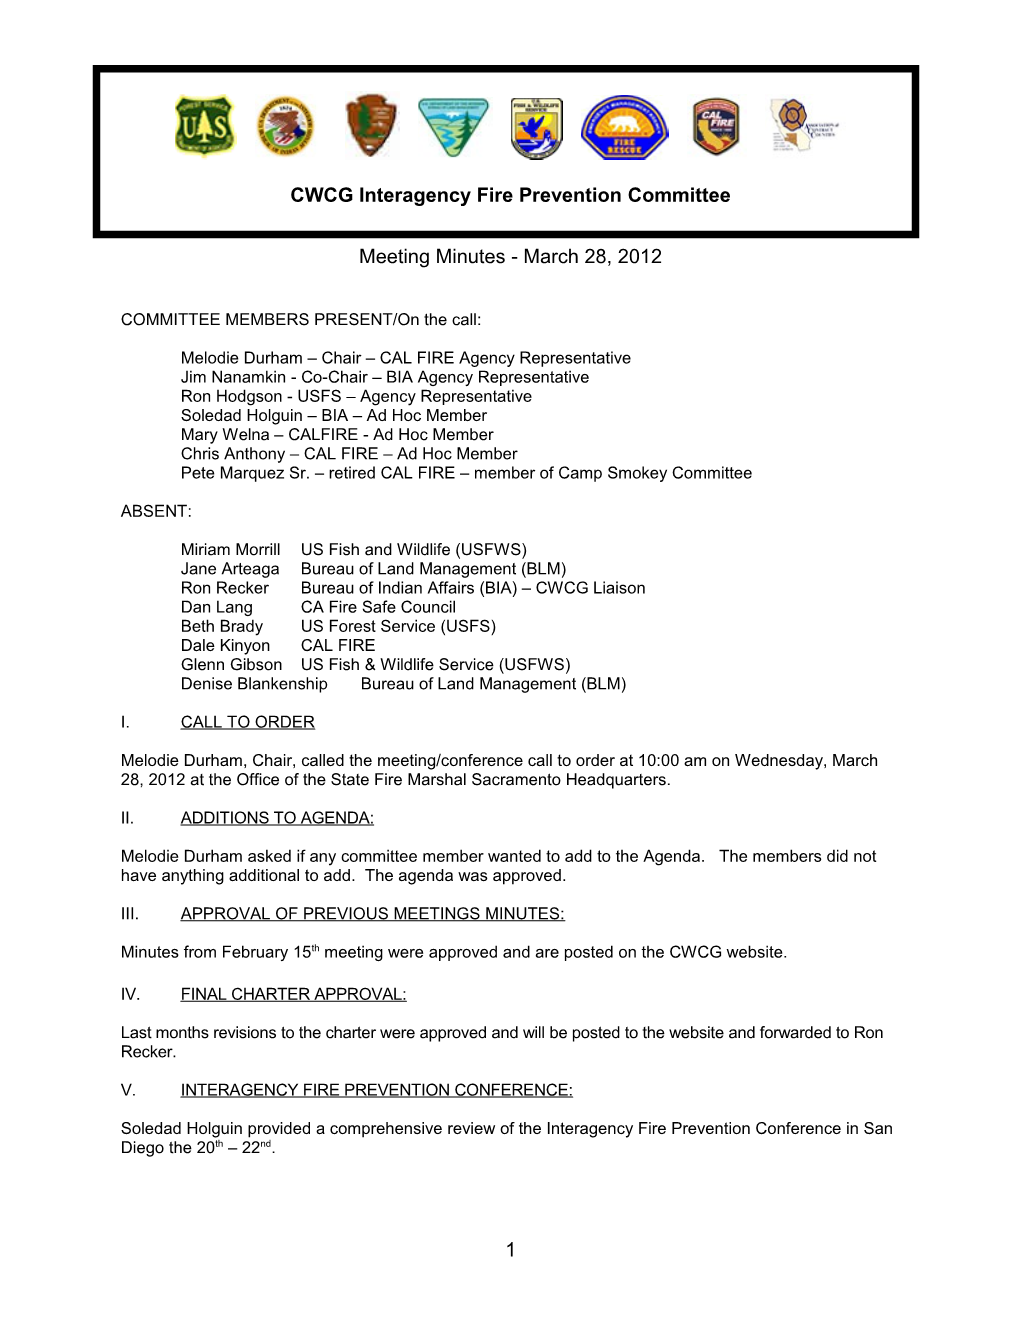 CWCG Interagency Fire Prevention Committee